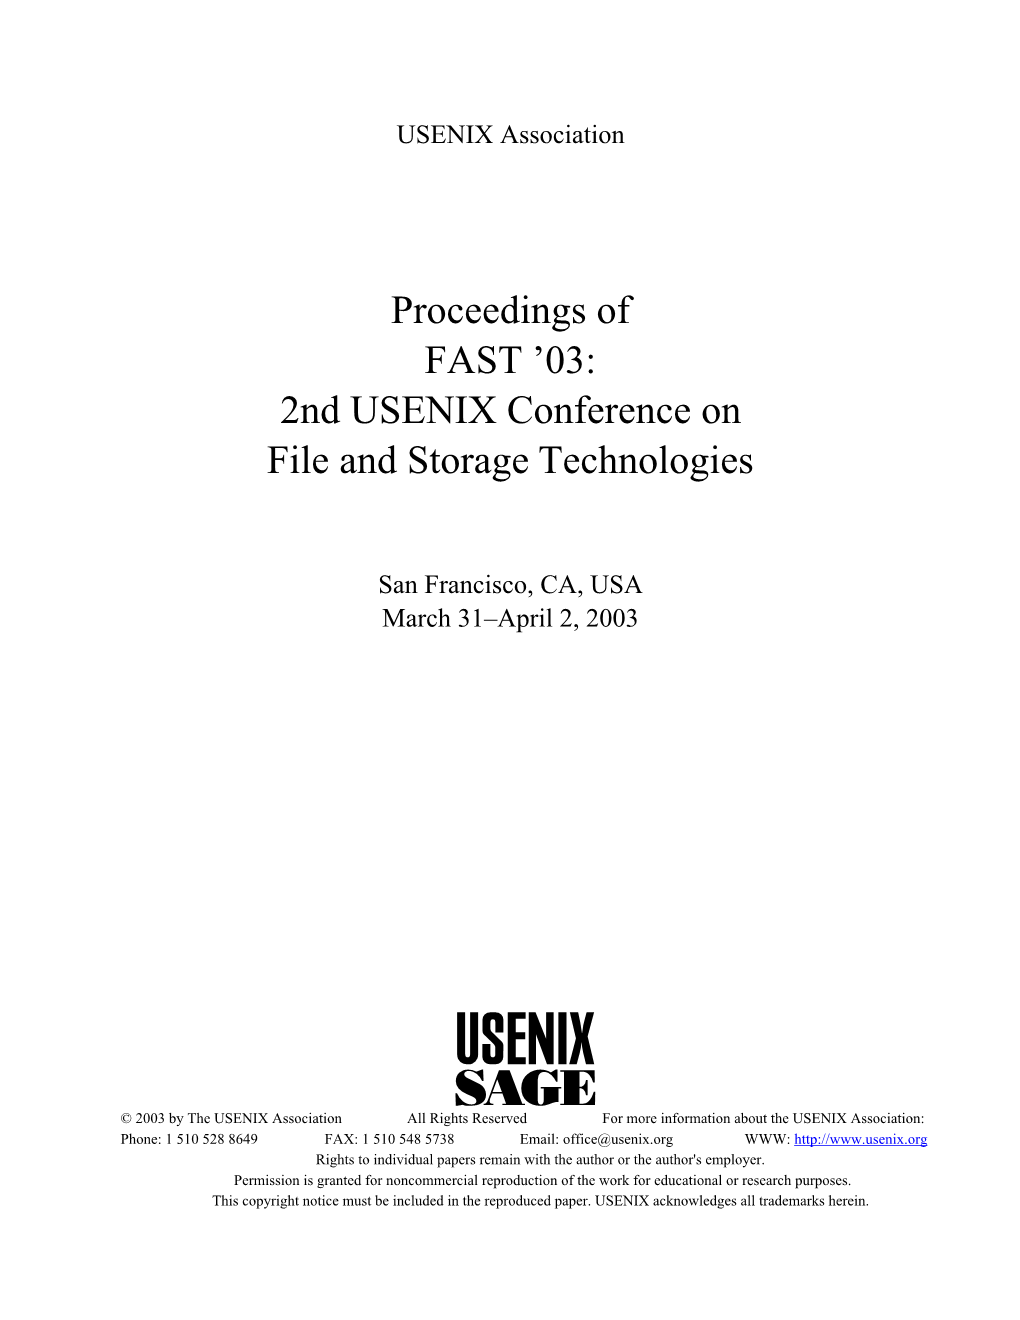 Proceedings of FAST '03: 2Nd USENIX Conference on File and Storage